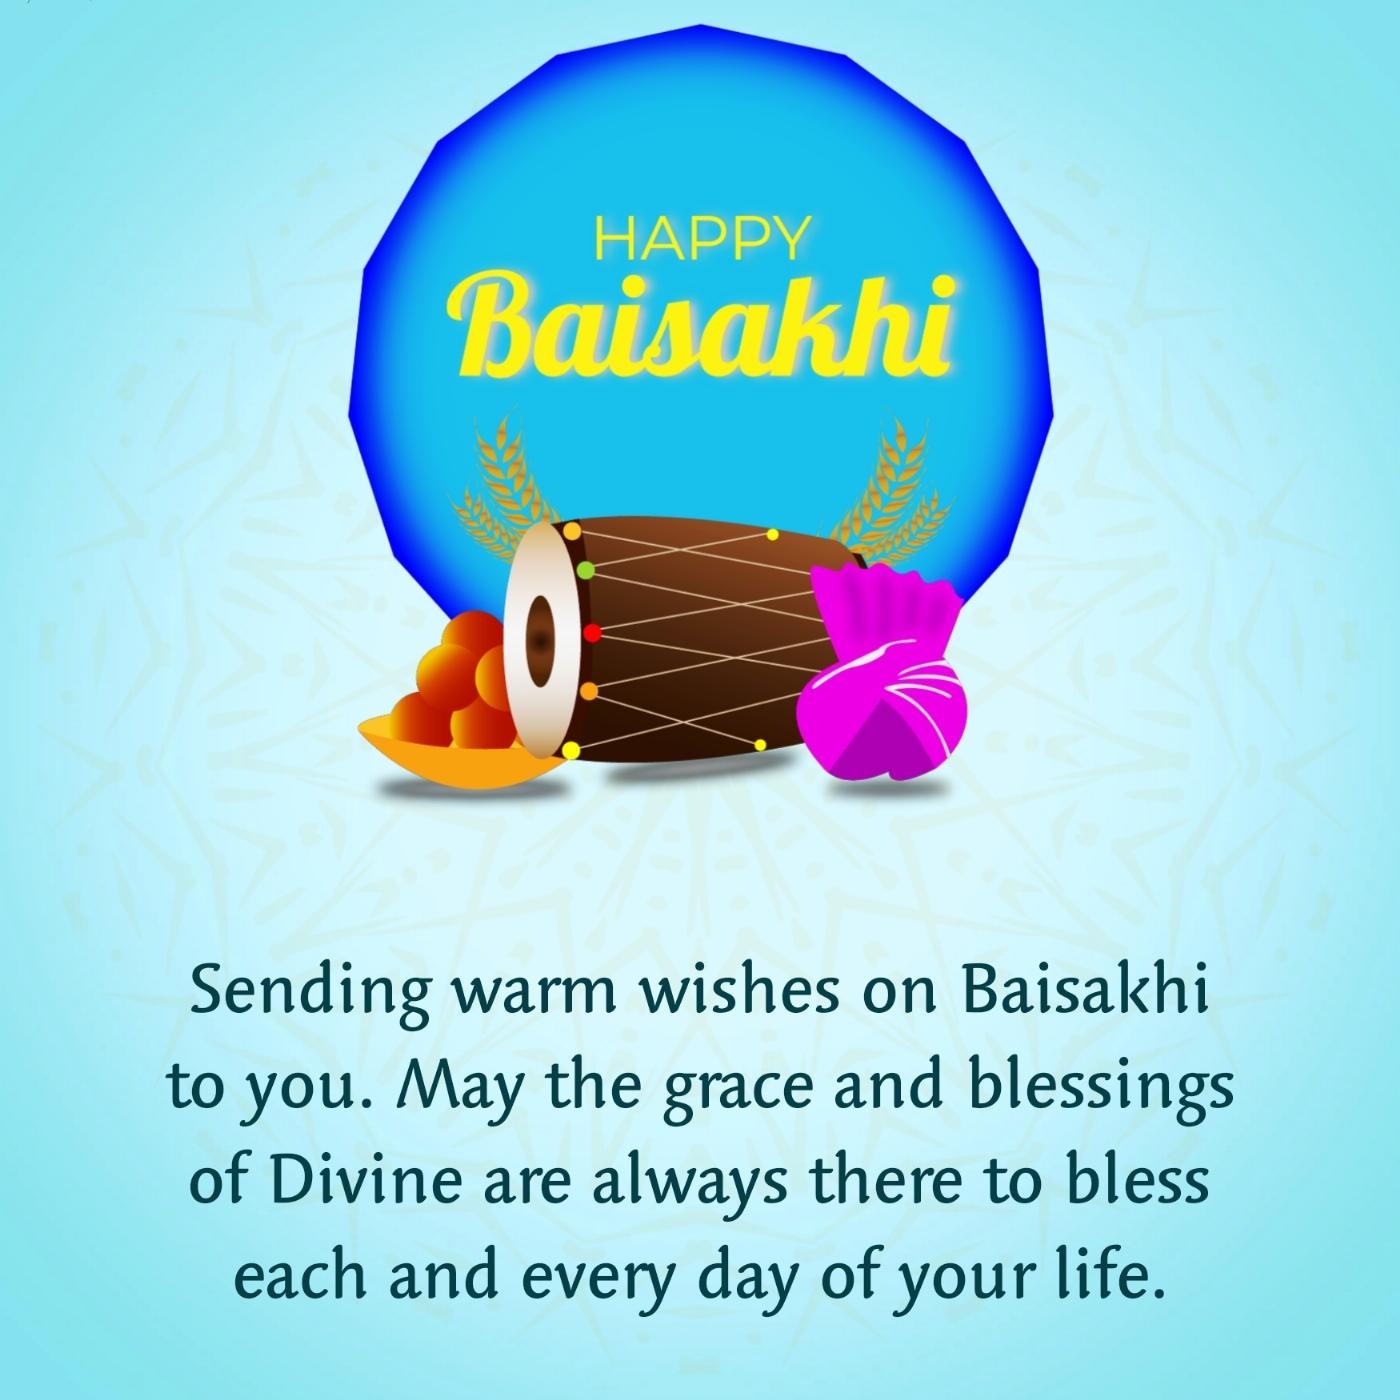 Sending warm wishes on Baisakhi to you May the grace